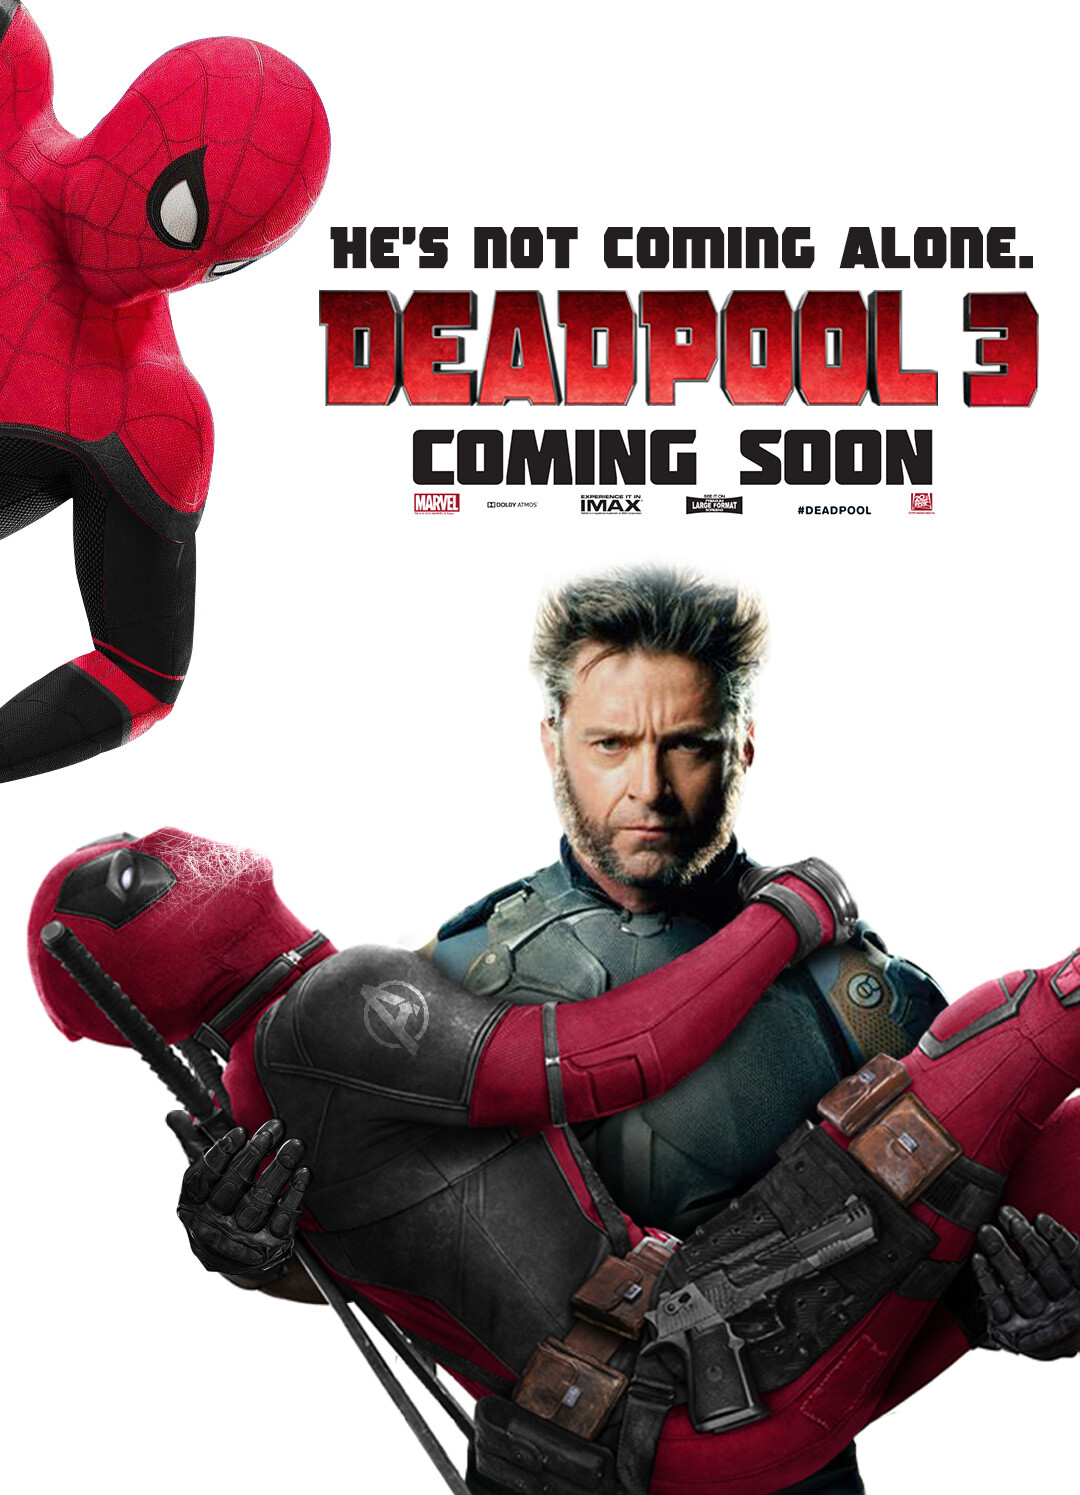 Cine Updates on X: From the studio that killed #IronMan. And #Thanos.  Twice. #Deadpool3 gets yet another playful poster inspired by #FreeGuy!   / X